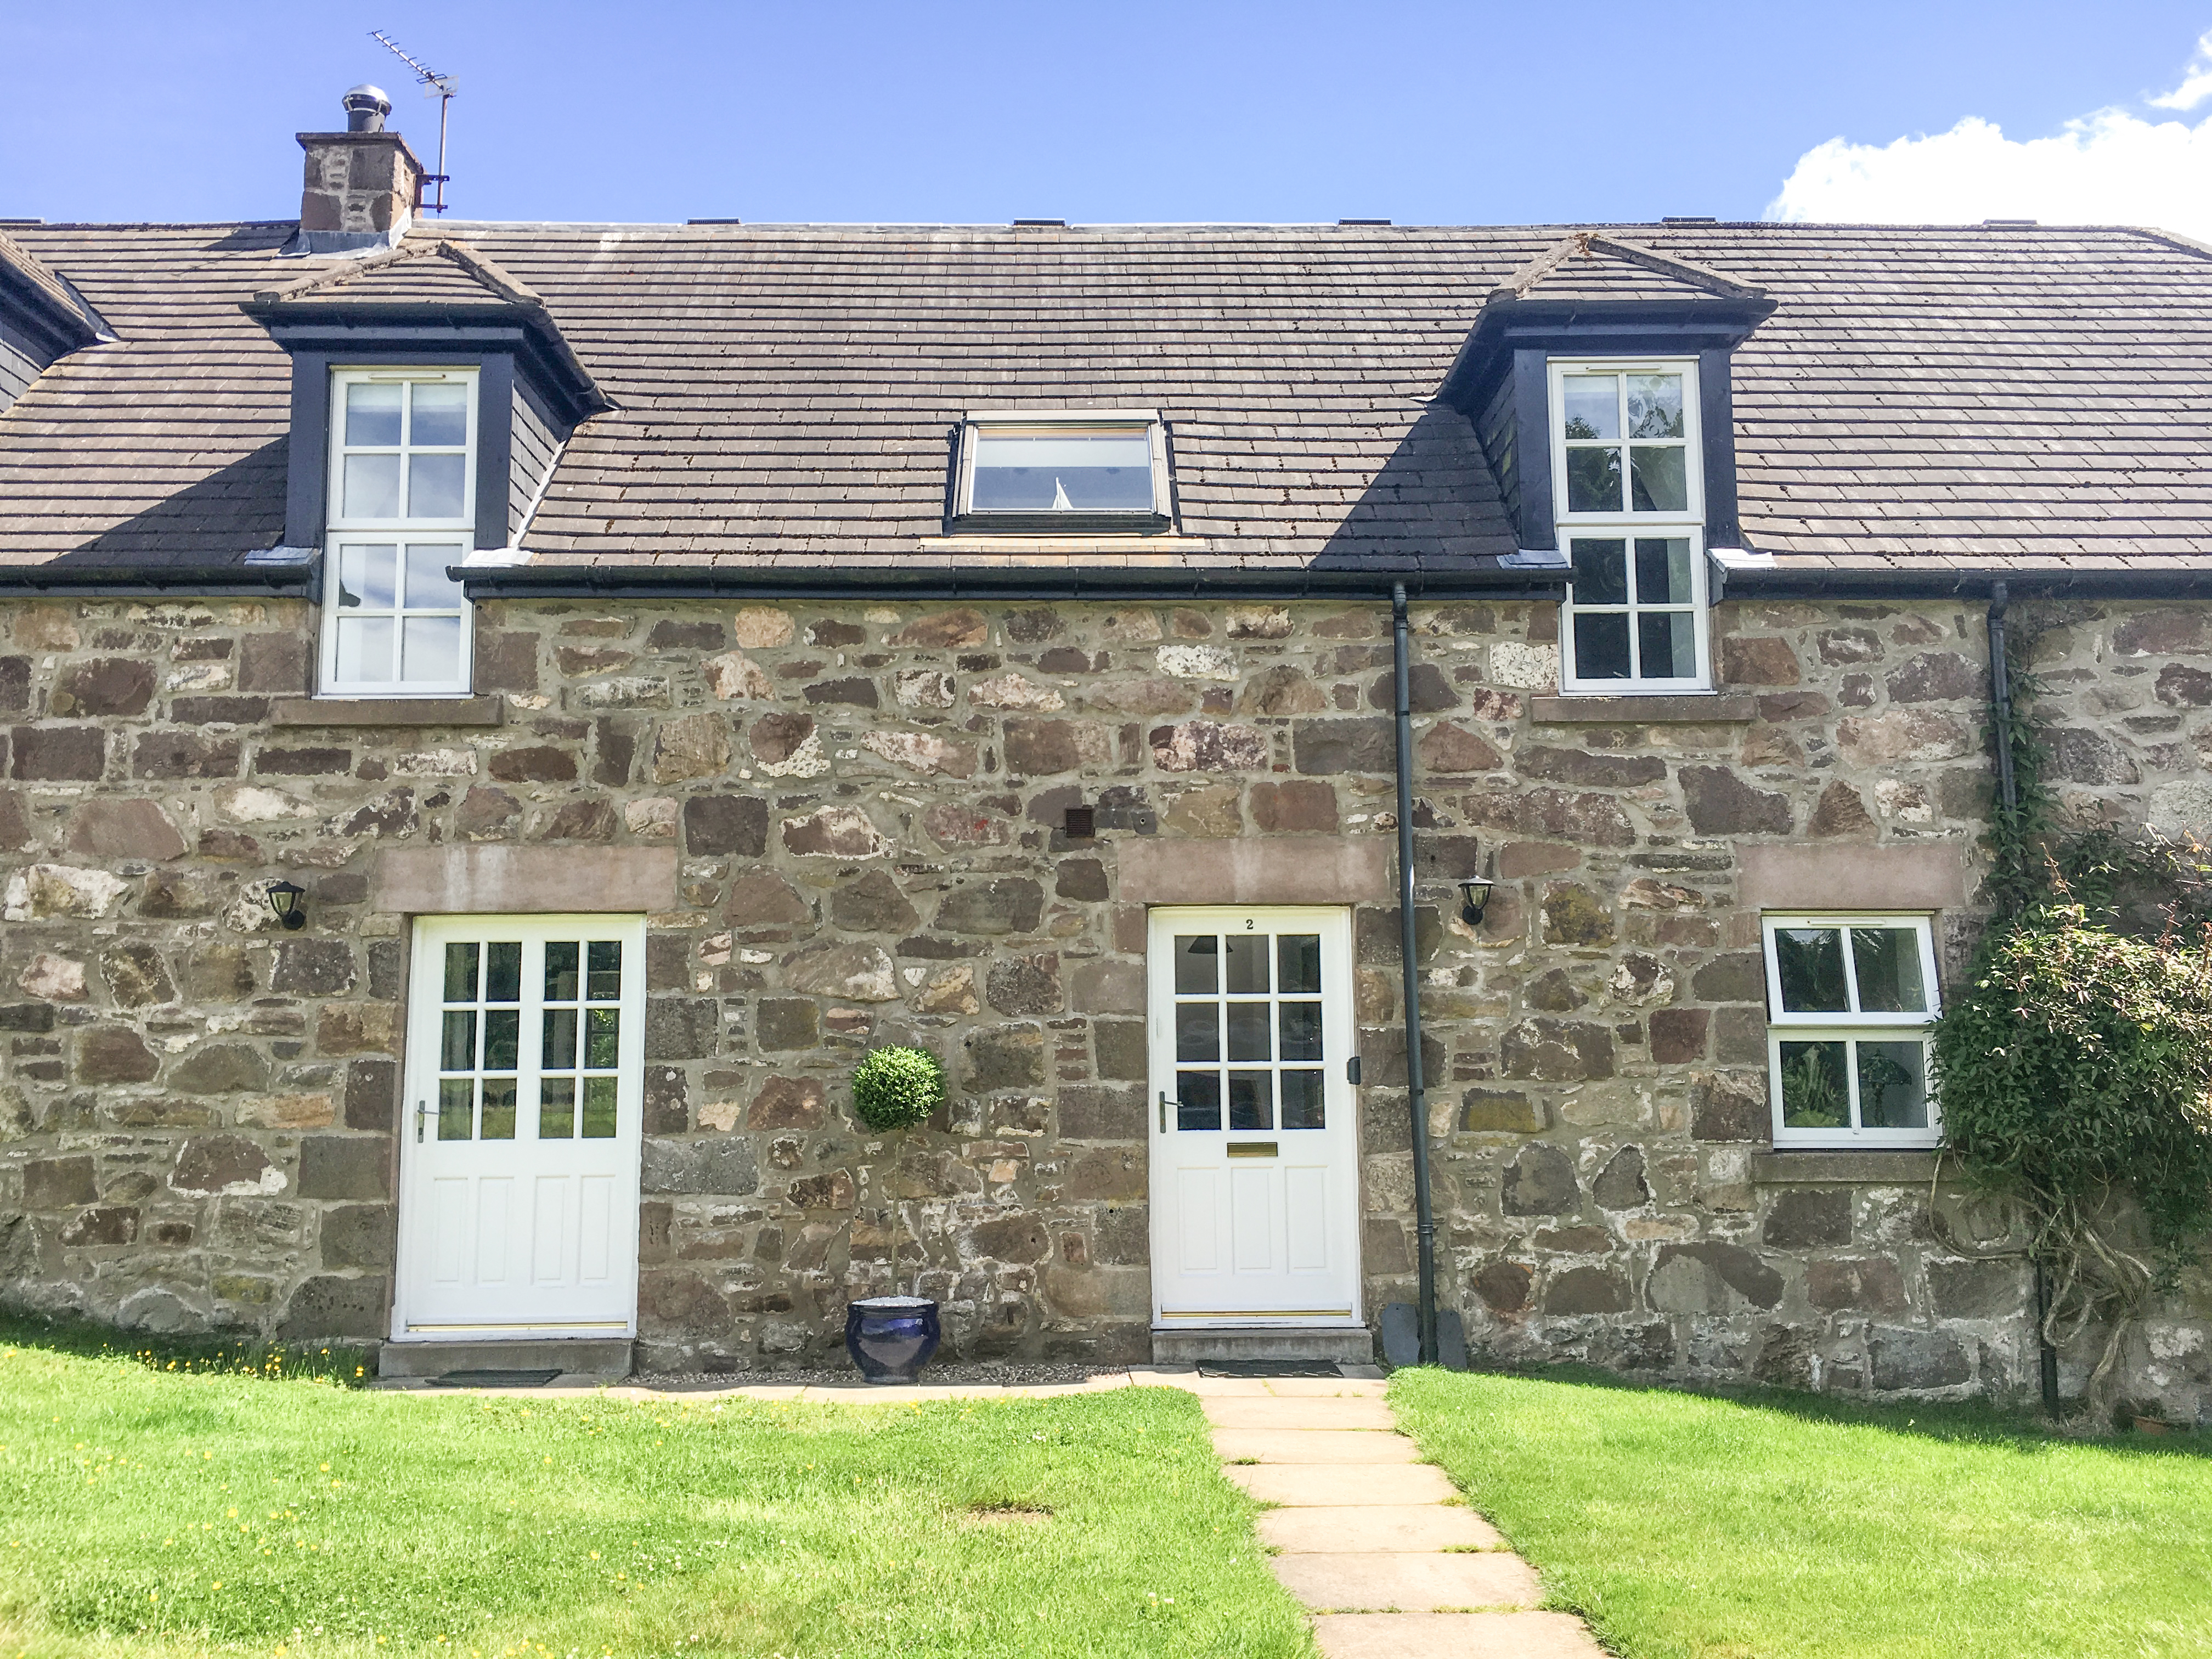 Stonehaven Cottages  Banchory and Lower Deeside  Walkhighlands 